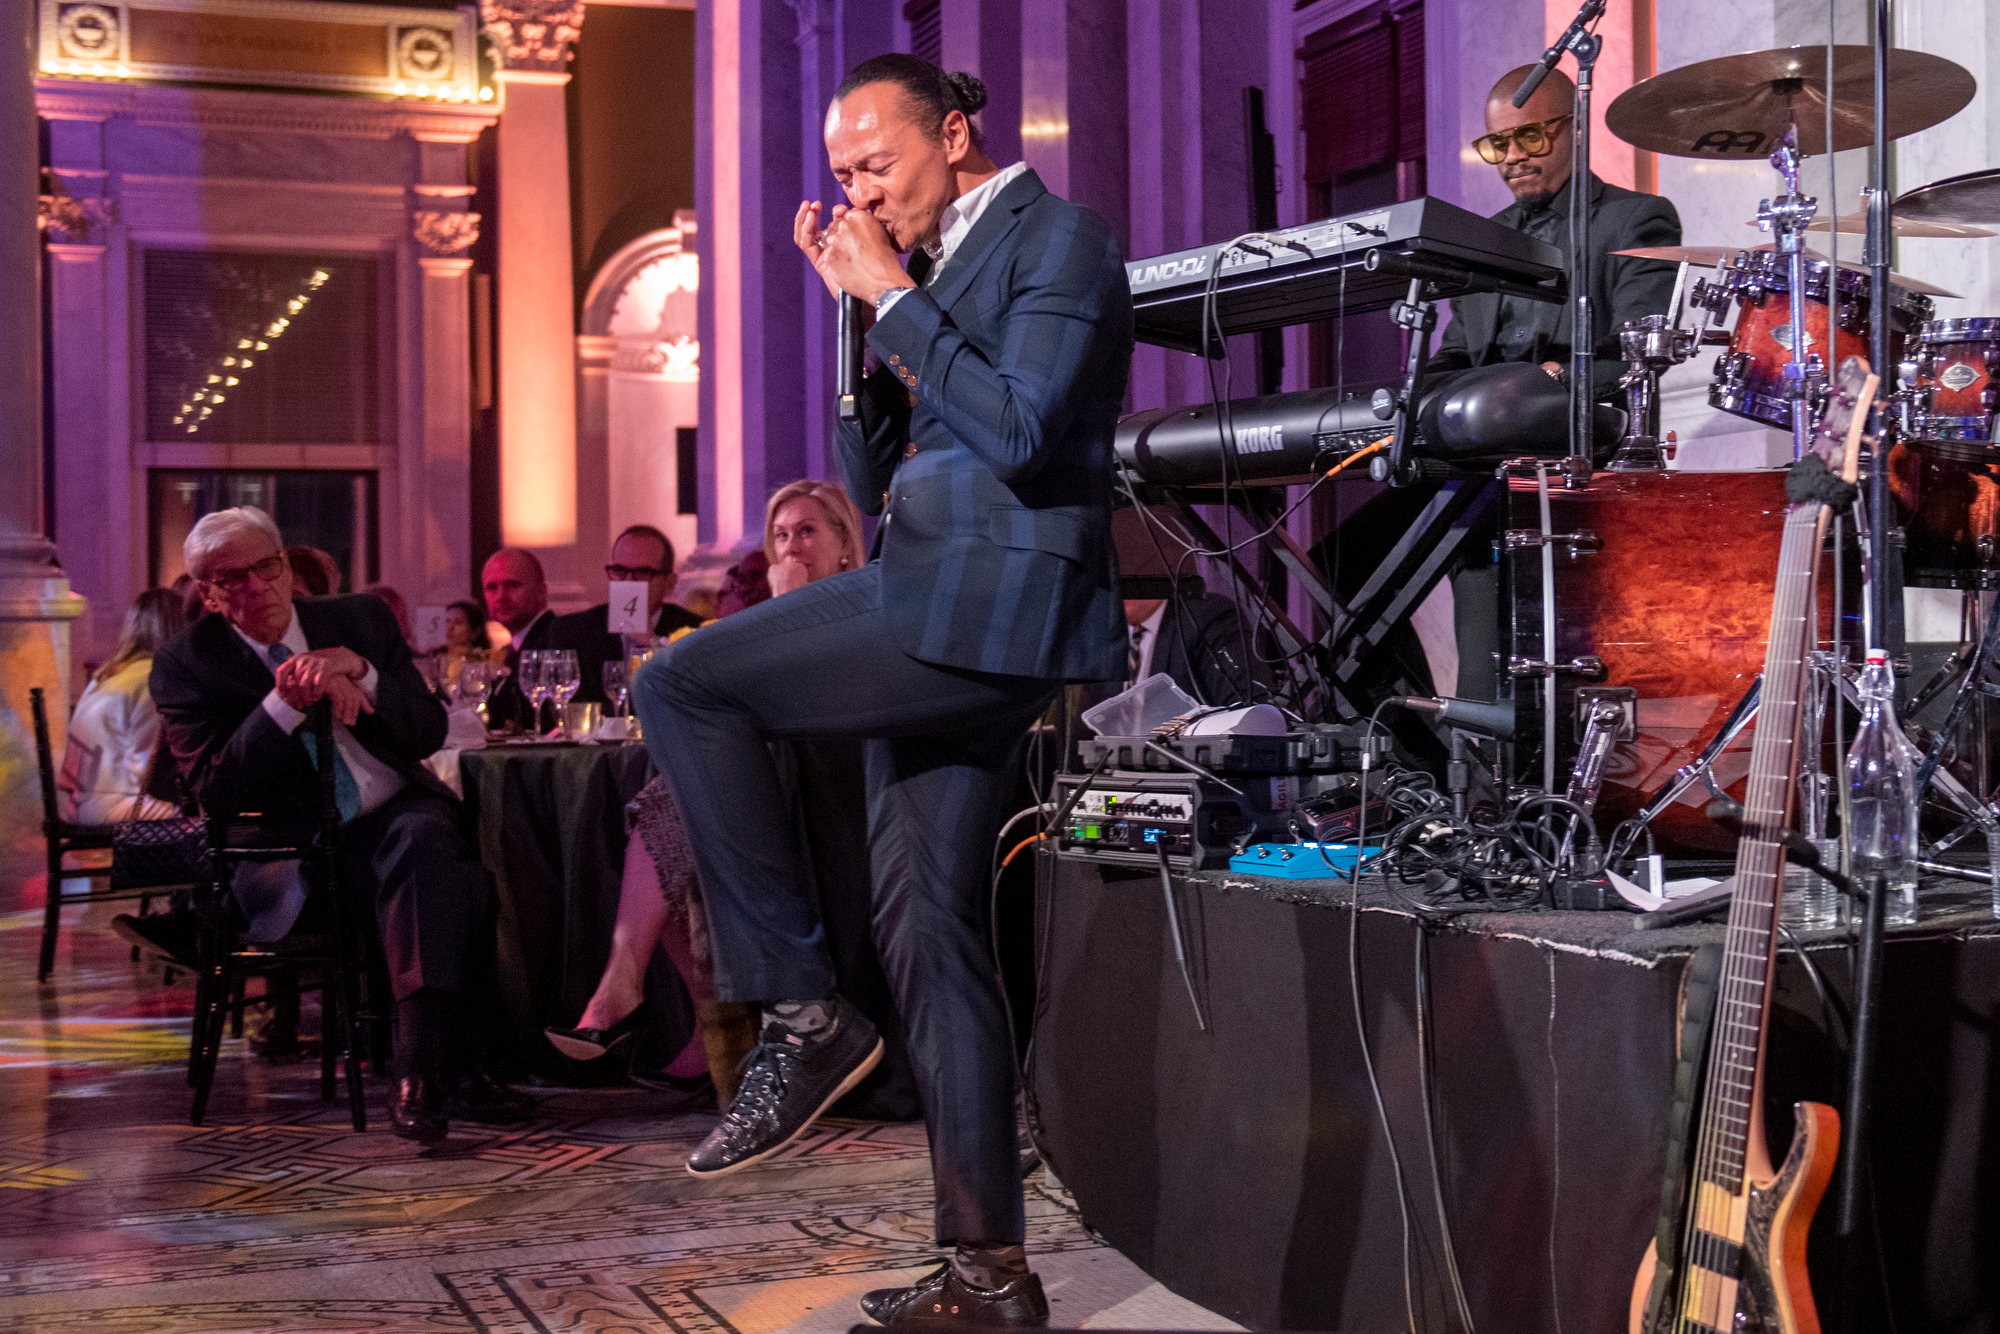 Harmonica virtuoso Frédéric Yonnet performs at a tribute to U.S. Supreme Court Justice Ruth Bader Ginsburg at the Library of Congress in Washington, D.C. on Jan. 30, 2020. LBJ Foundation photo by Jay Godwin.